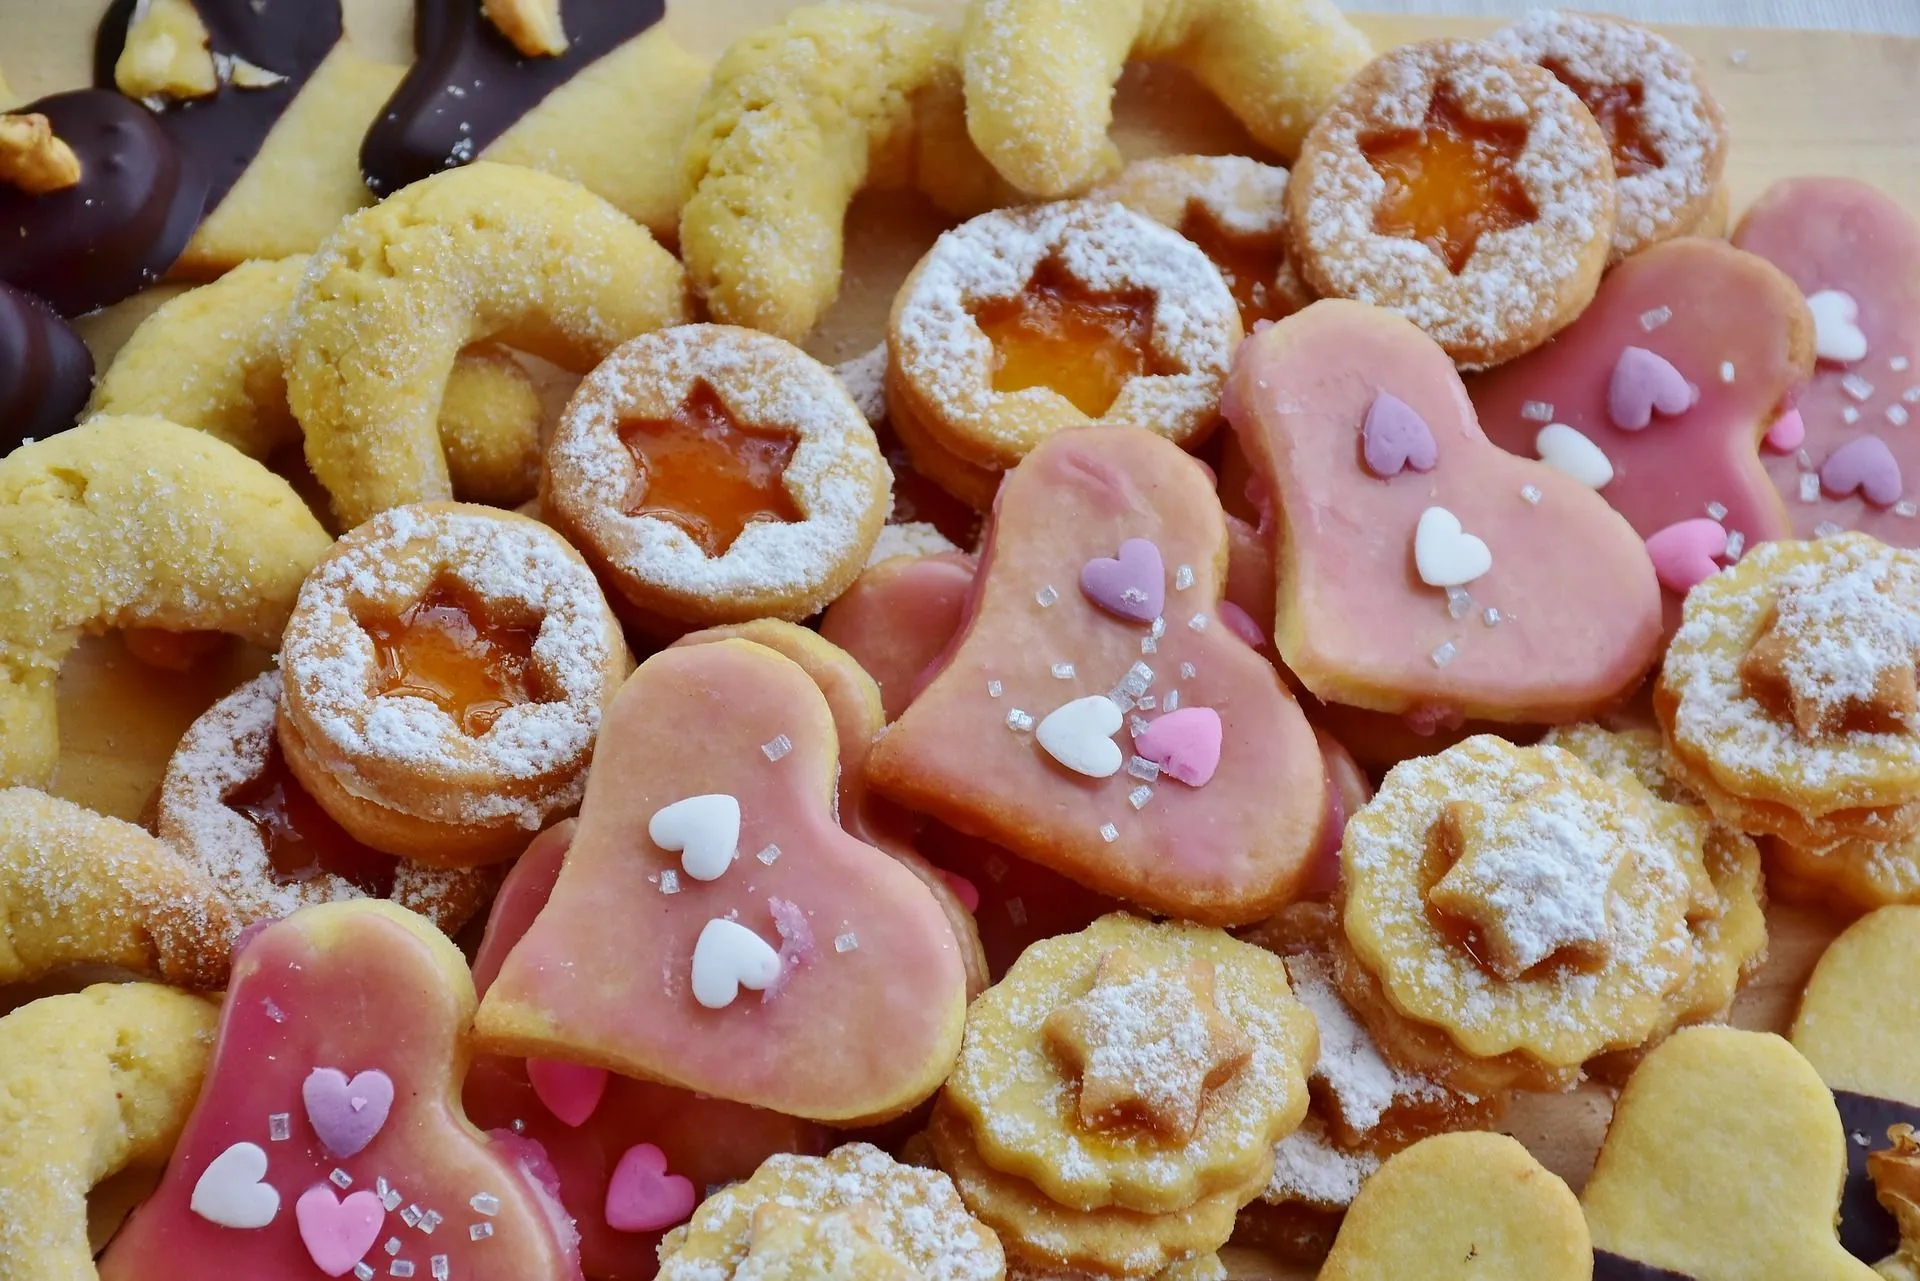 Sugar cookies are one of the most loved baked items.